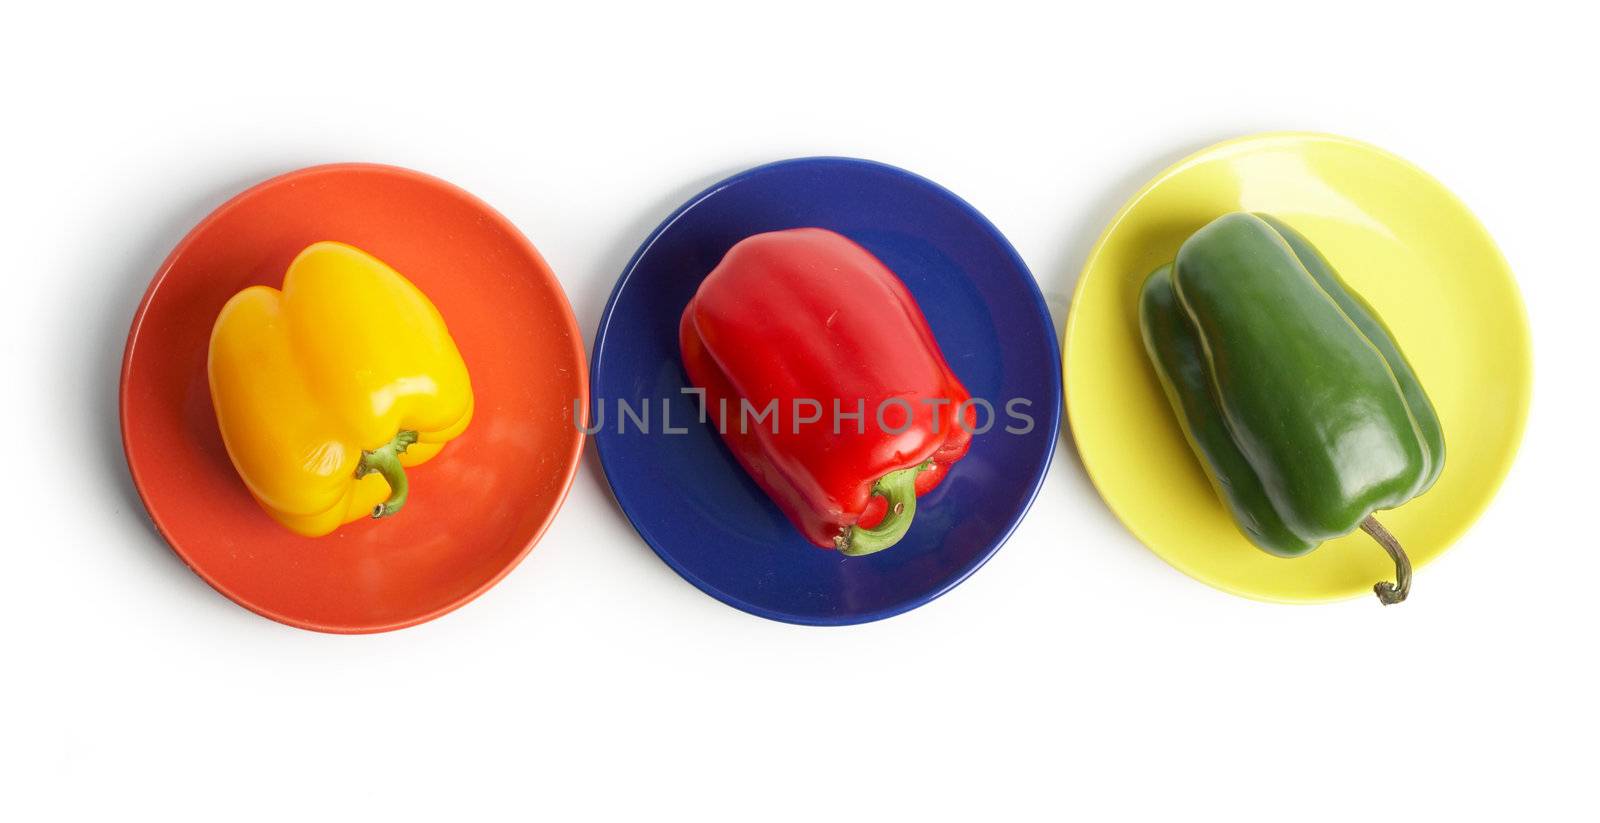 An image of color vegetables on a saucers